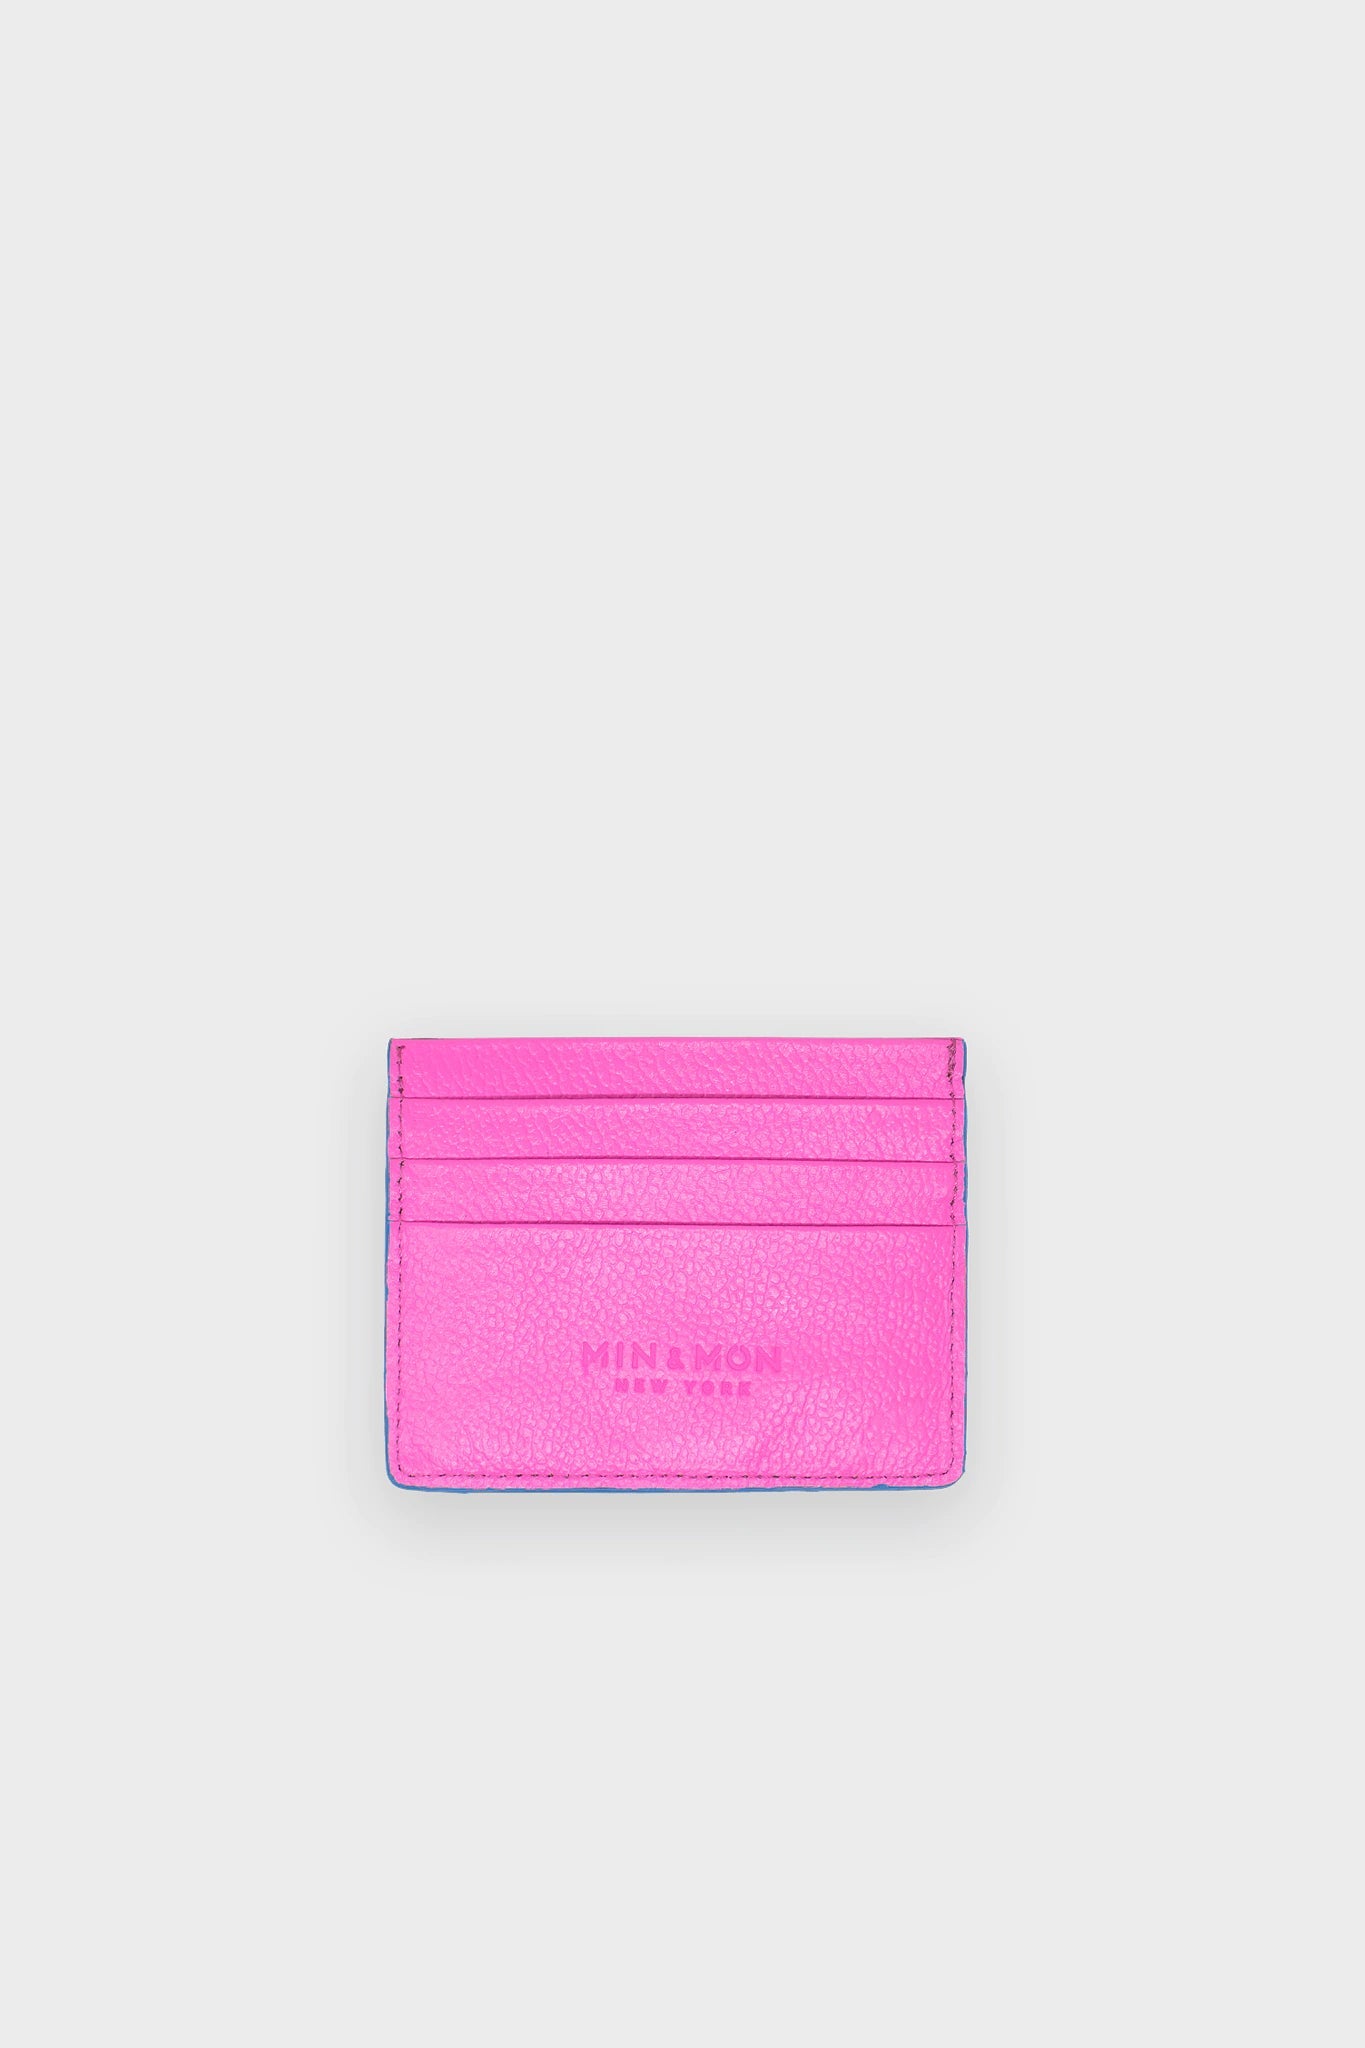 Filium Bubblegum Pink Leather Cardholder - All Over Eyes Embroidery - Back view